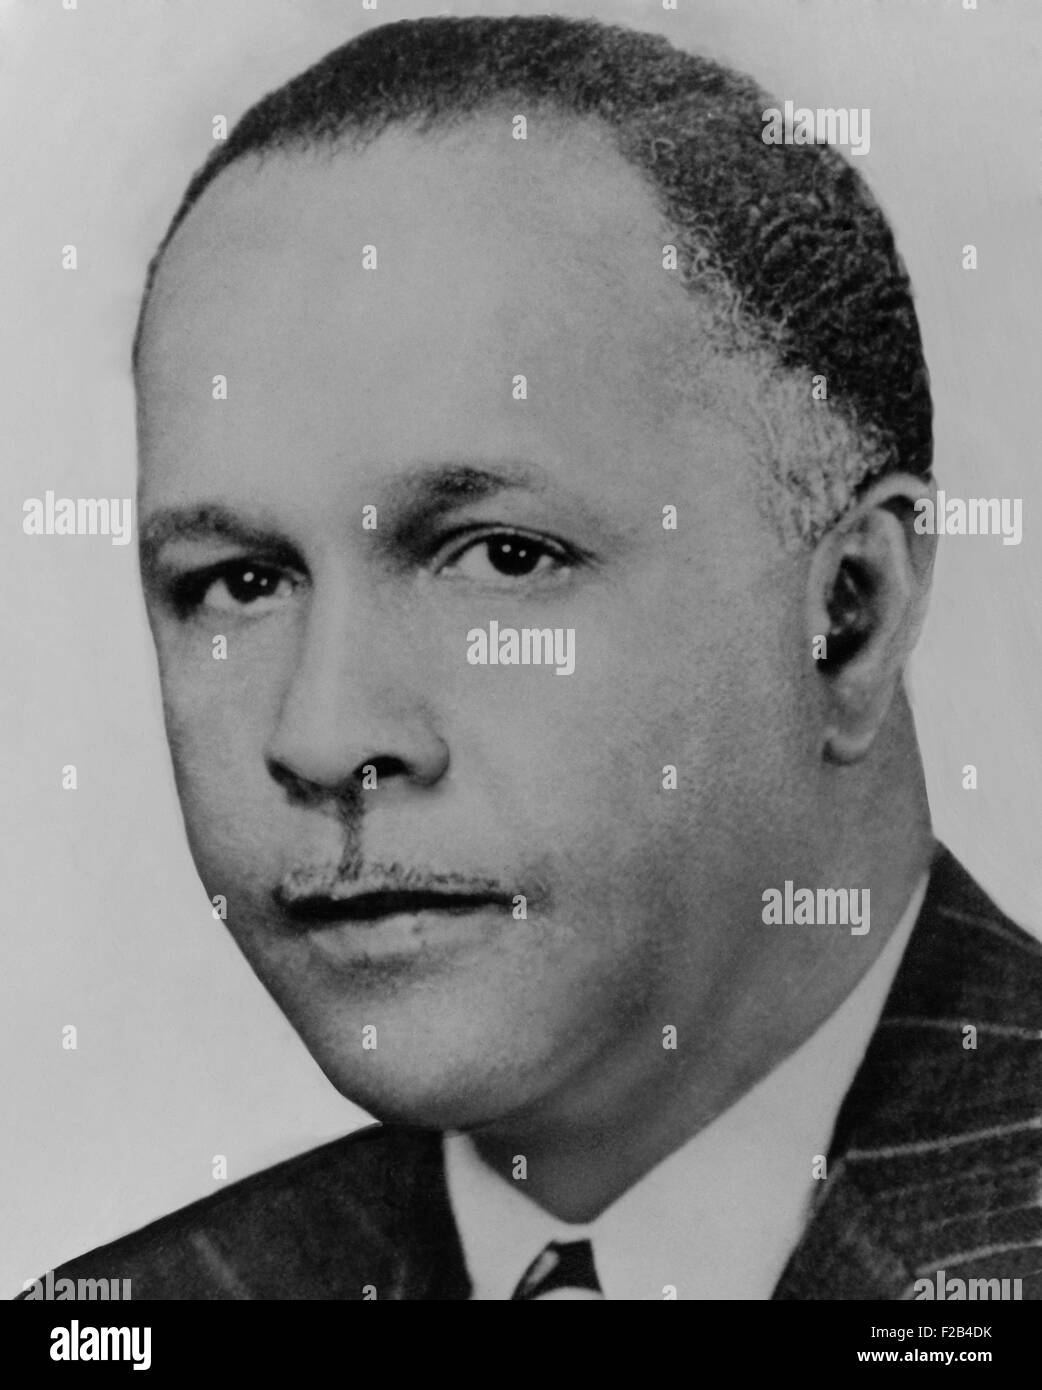 Dr. Percy L. Julian was awarded 130 chemical patents, many of medicinal drugs from plants. He developed industrial large-scale chemical synthesis of human hormones. 1949. - (BSLOC 2015 1 64) Stock Photo